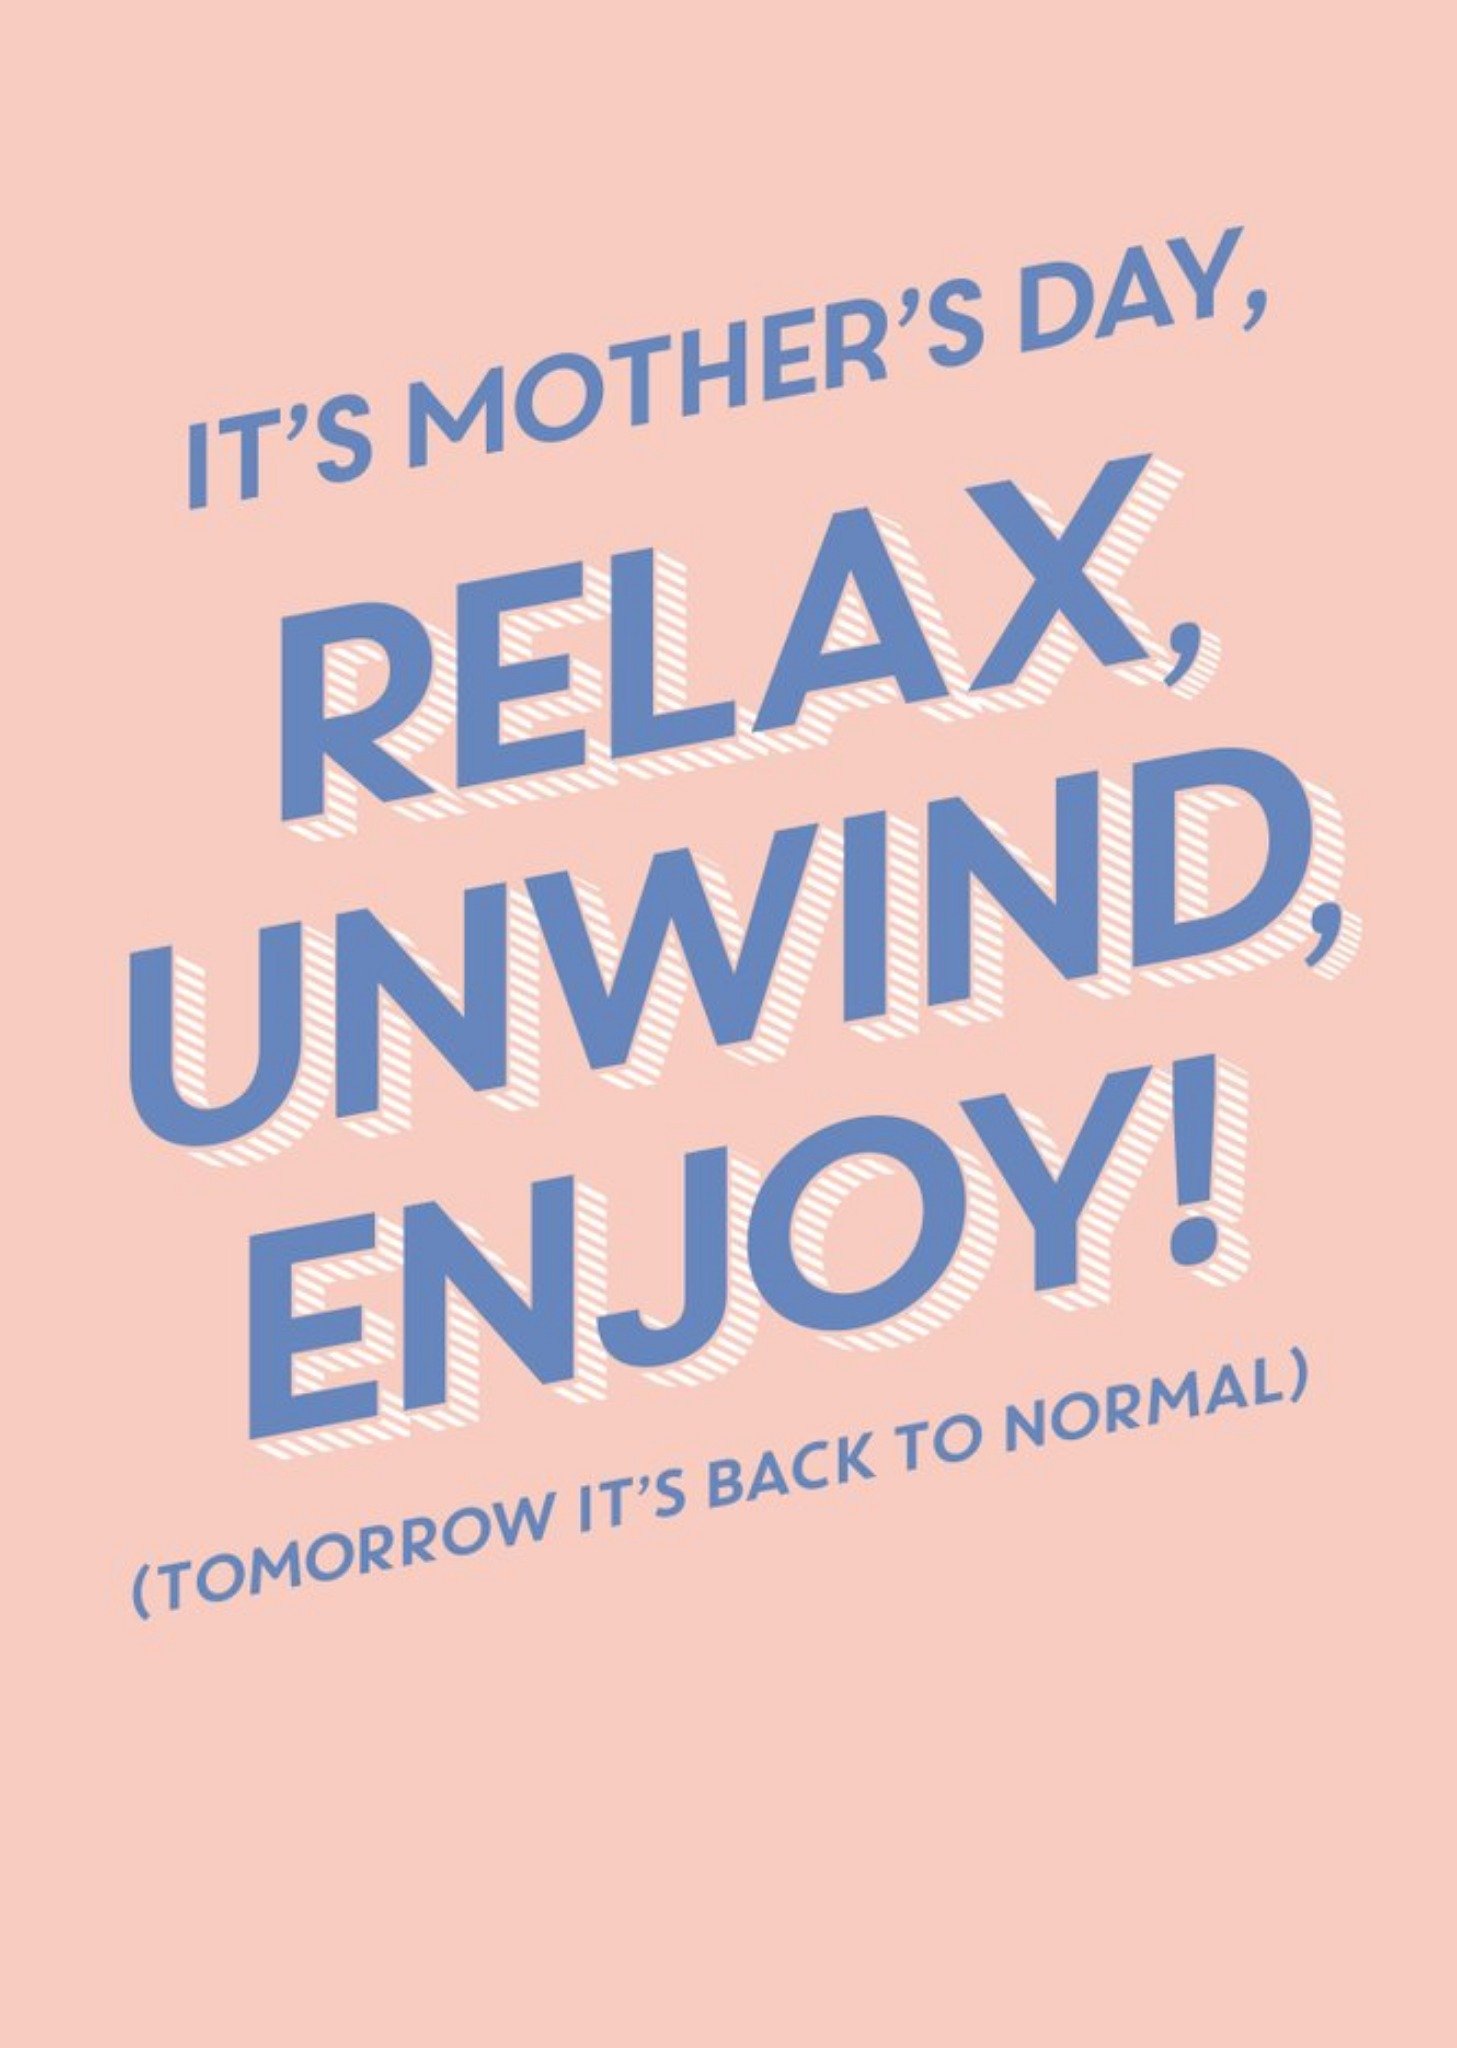 Moonpig Relax Unwind Enjoy Tomorrow Is Back To Normal Funny Mother's Day Card Ecard